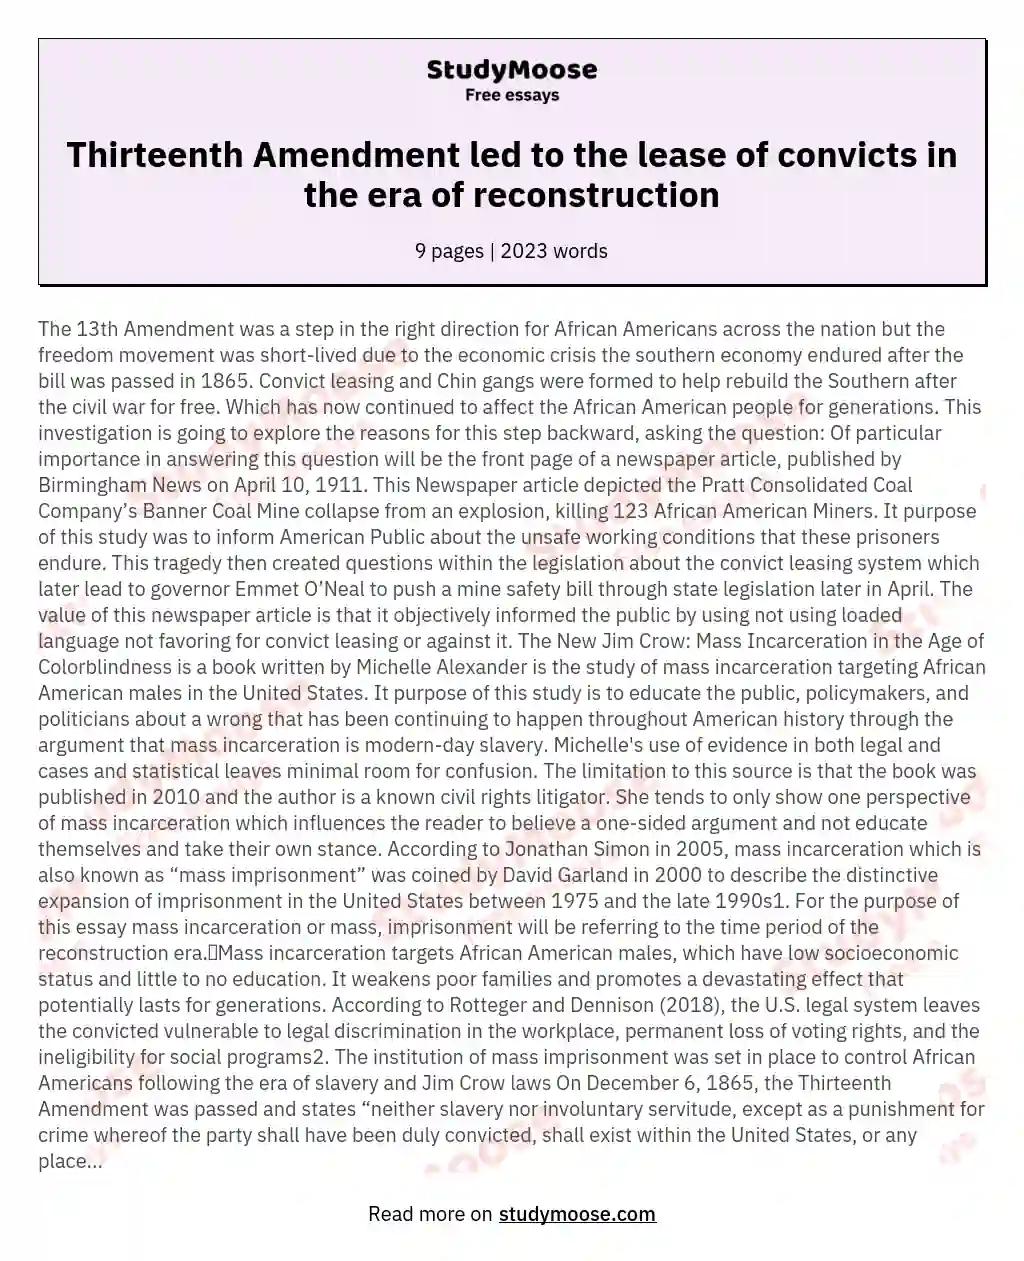 Thirteenth Amendment led to the lease of convicts in the era of reconstruction essay